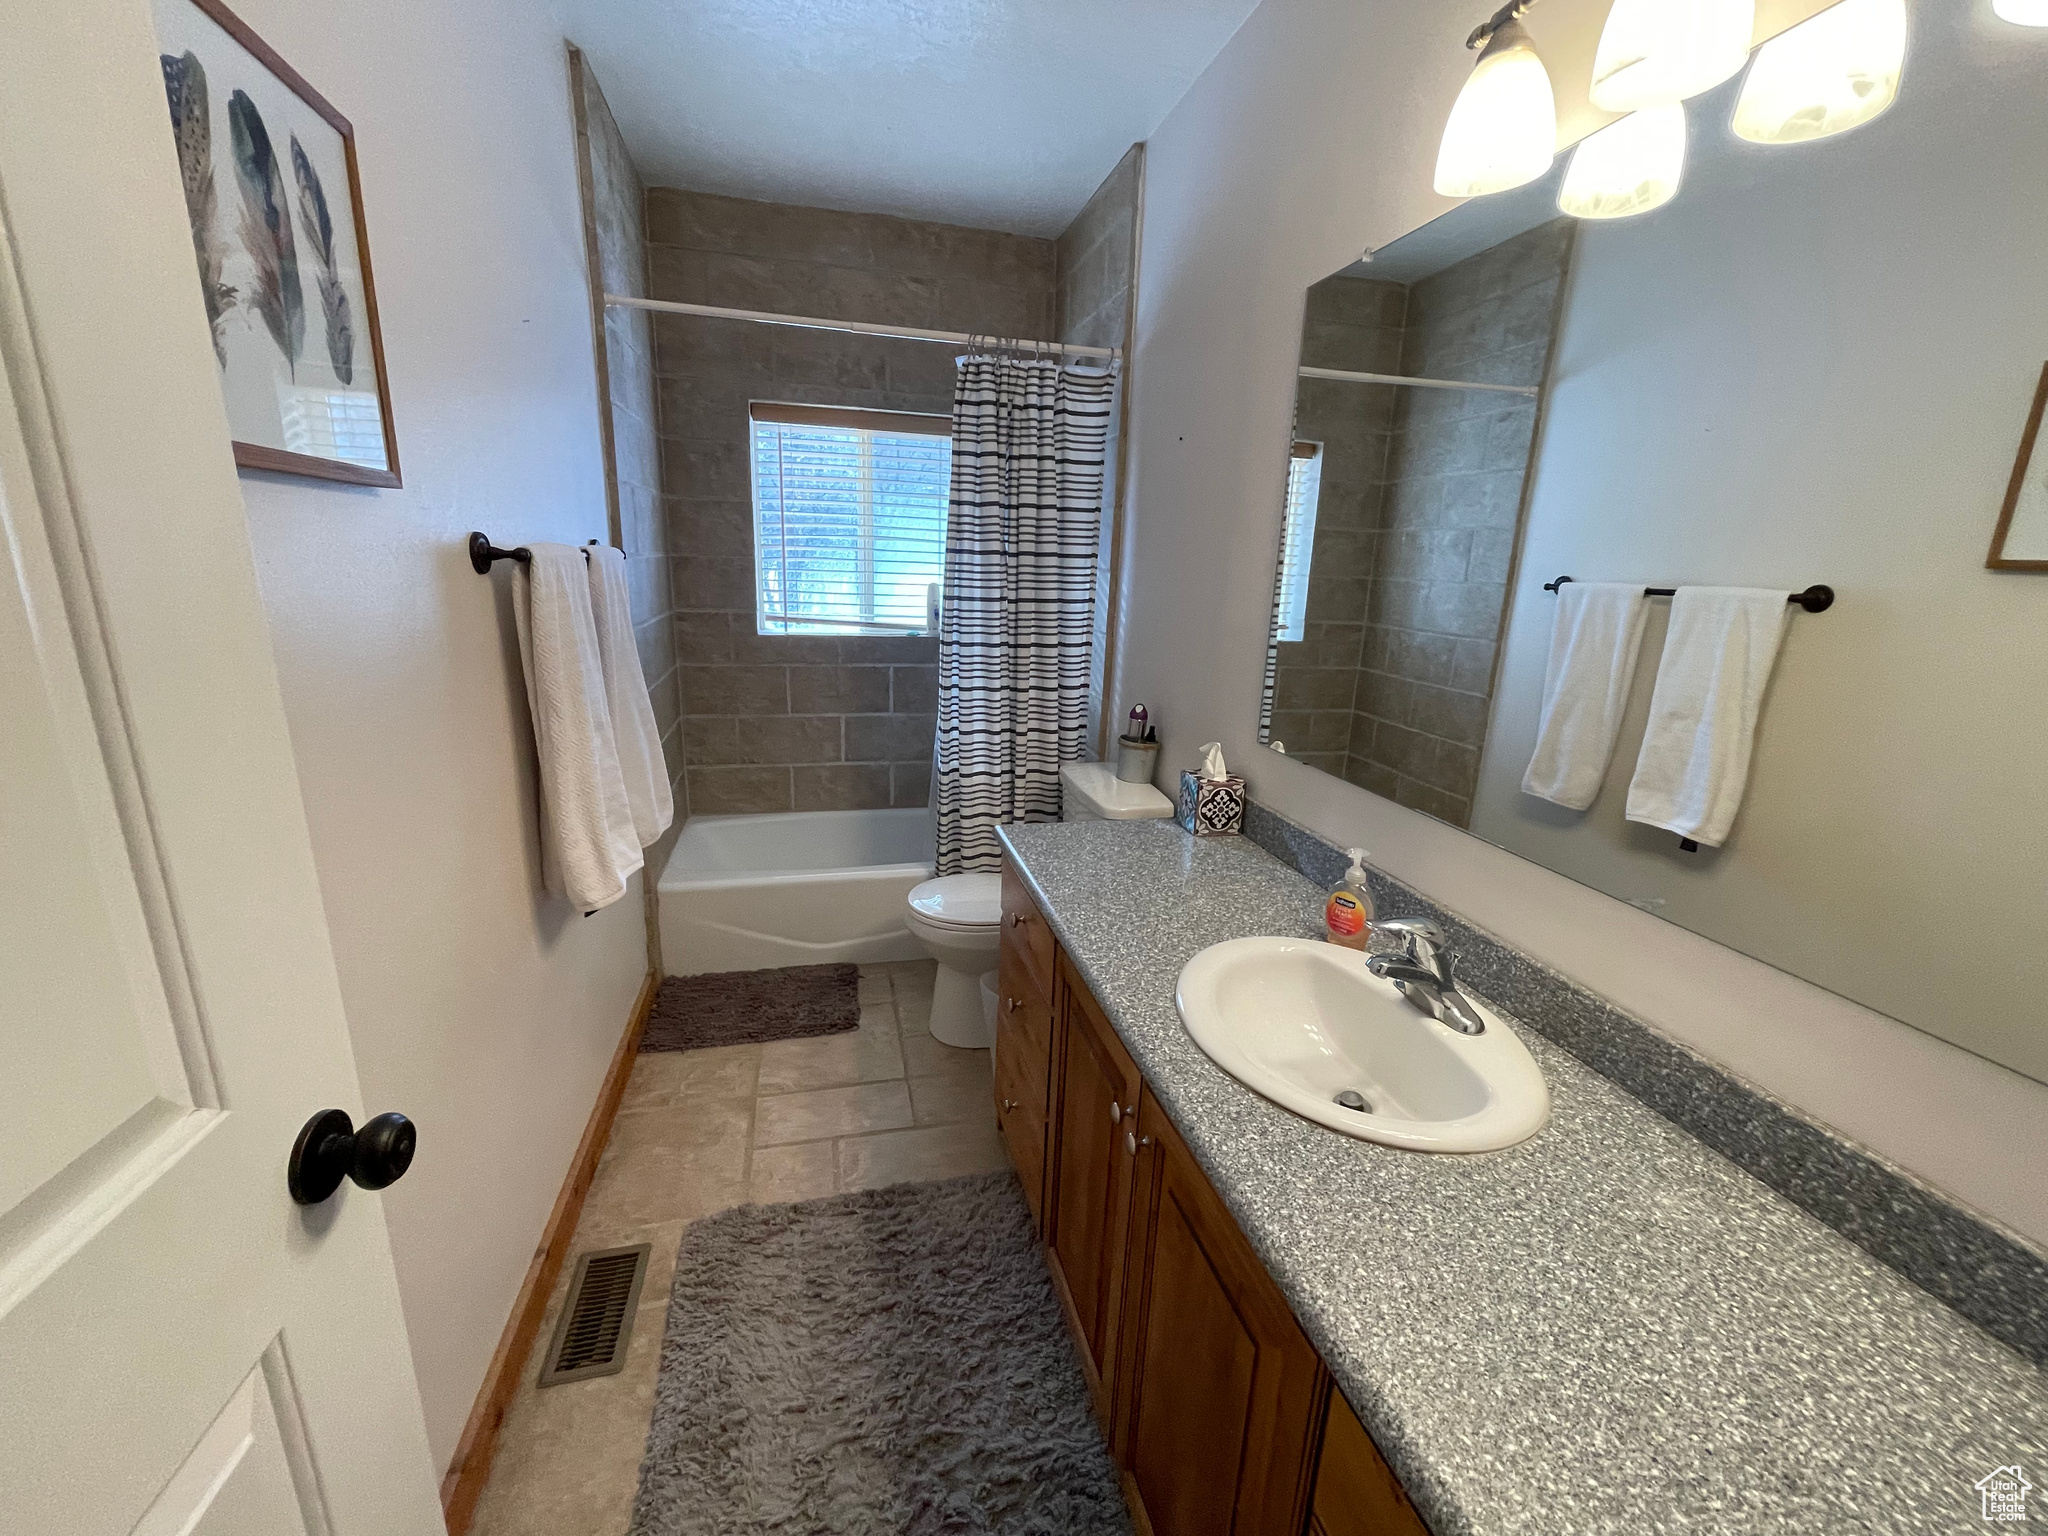 Full bathroom with vanity, toilet, tile flooring, and shower / bathtub combination with curtain